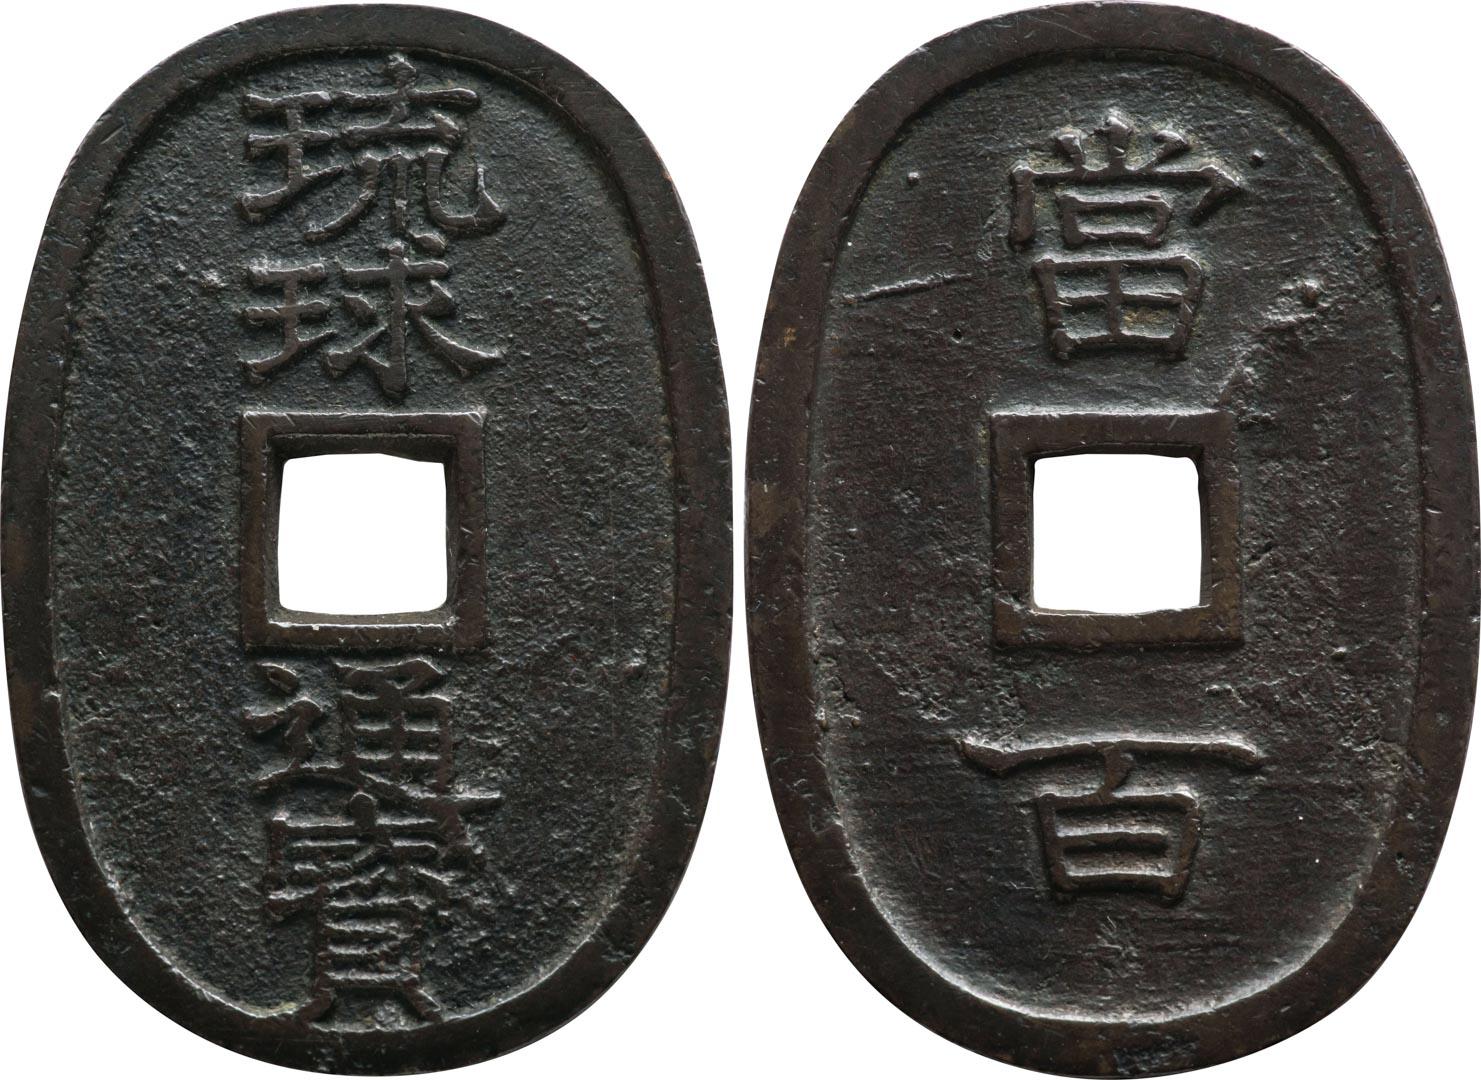 Lot: 28 | 琉球通宝 中字 | VF+ | Auction No. 102 | GINZA COINS CO